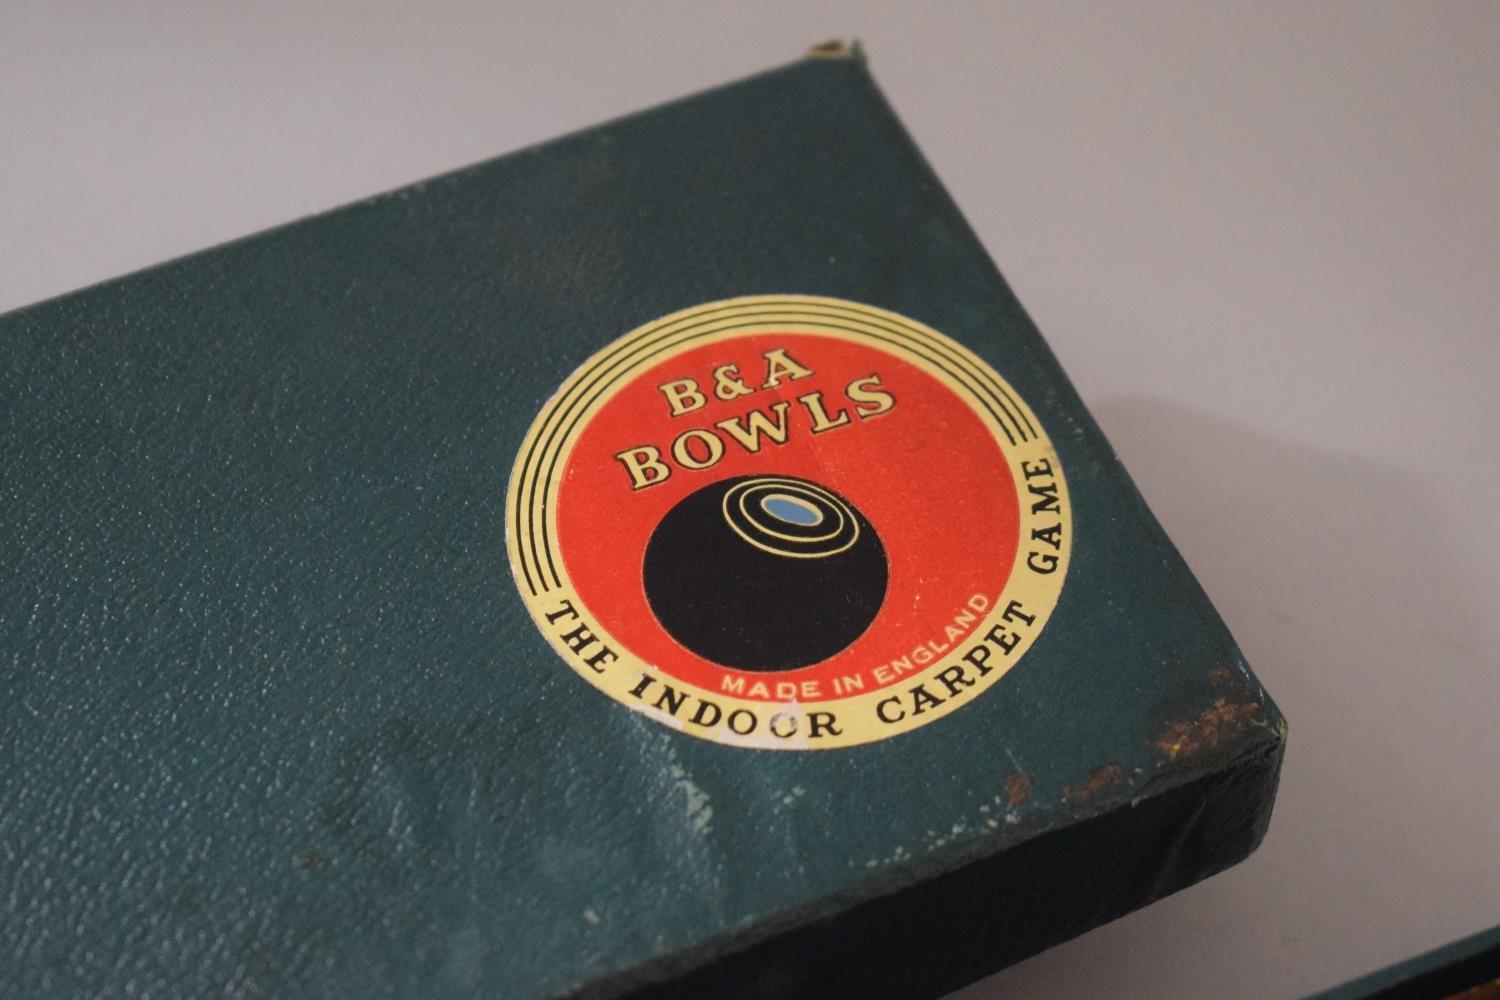 A Boxed Set of the Indoor Carpet Bowls by Brookes & Adams Ltd., Birmingham - Image 2 of 2